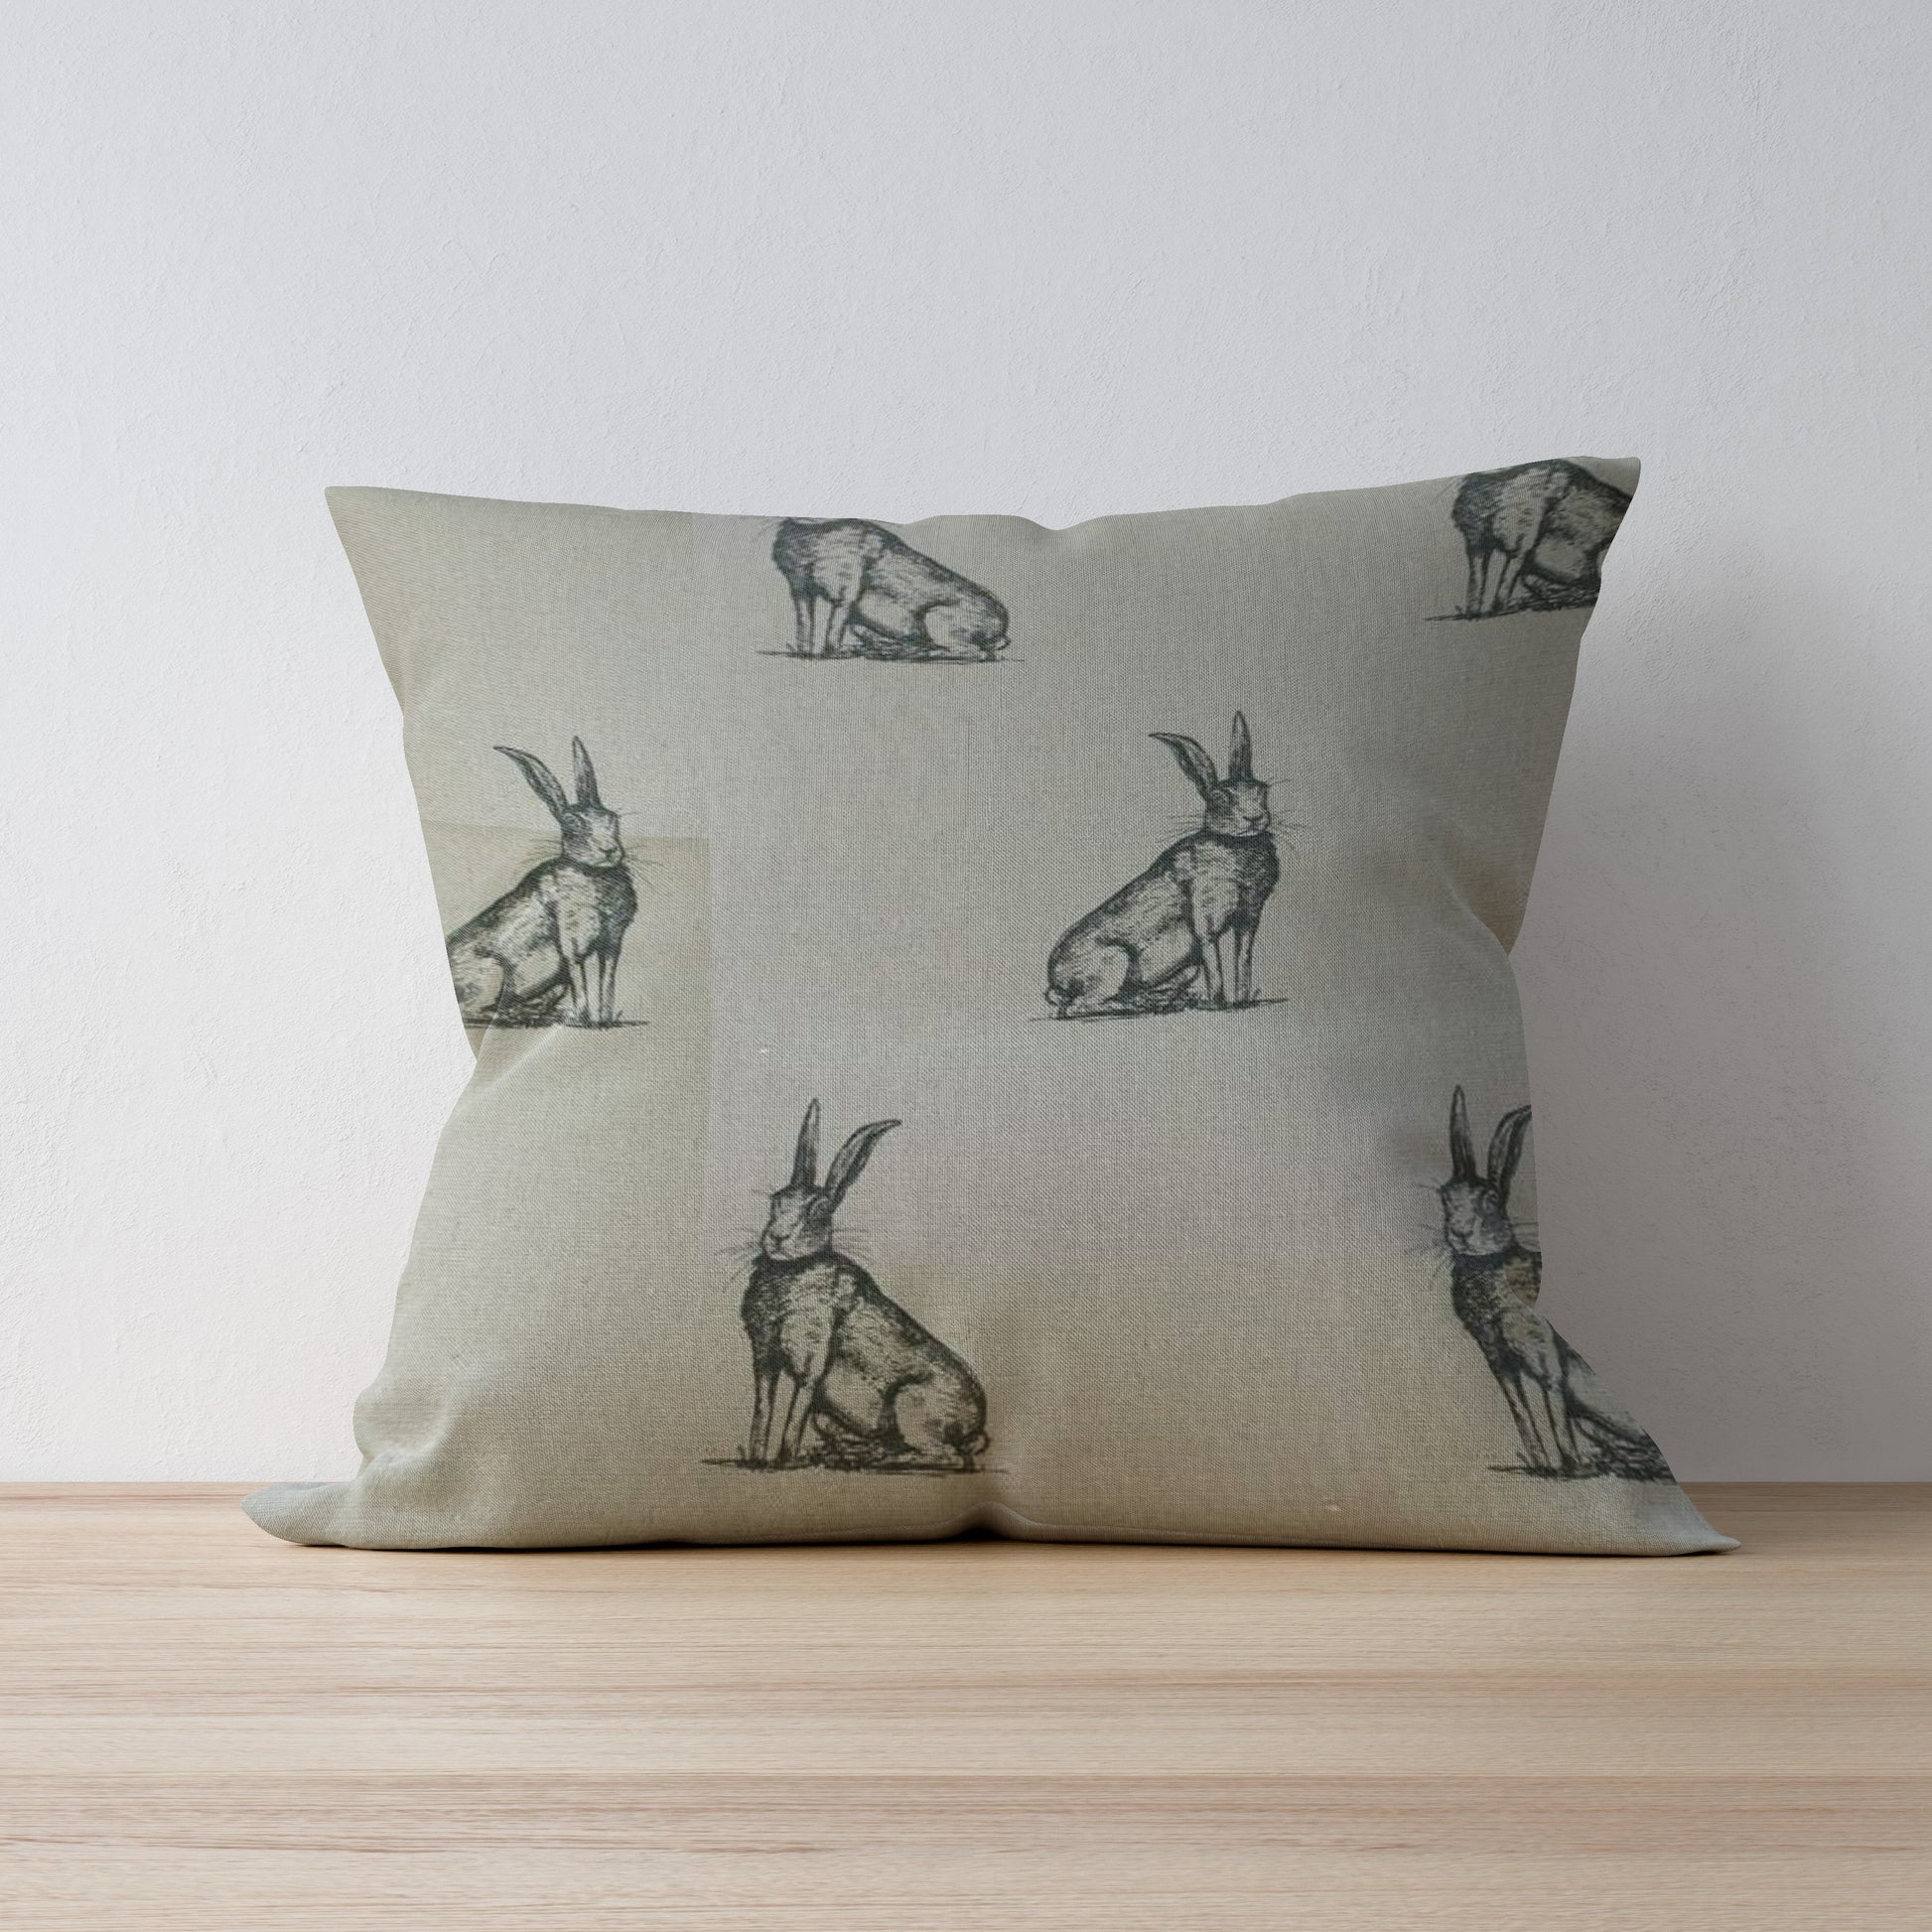 Hare Print Cushion - Made in Yorkshire by F&B - Forest Friends - Woodland Friends by Art of the Loom